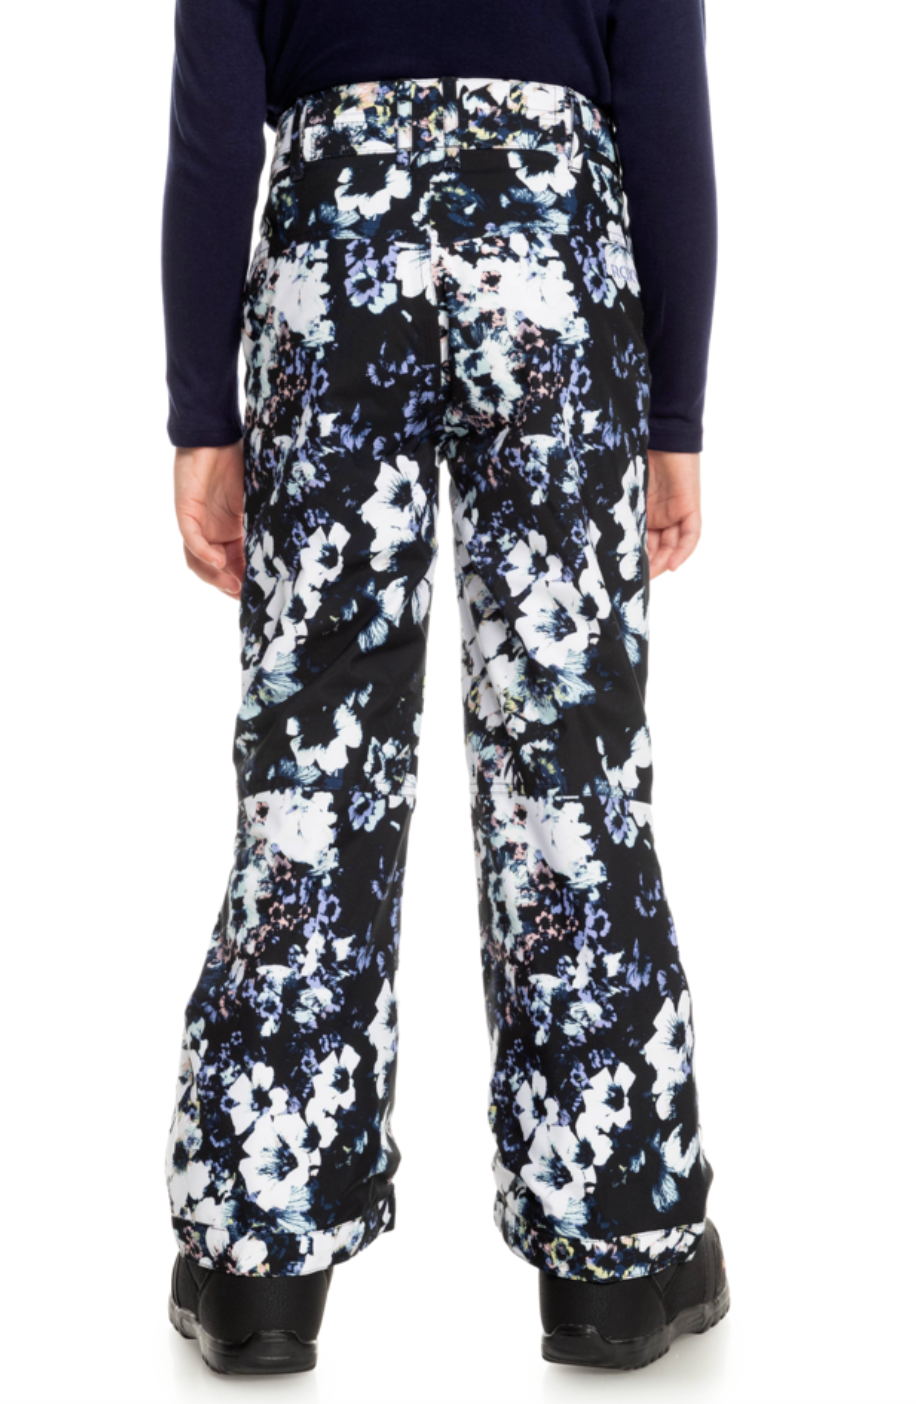 Geo Print Pants for #rSSchoolNight - Lil bits of Chic